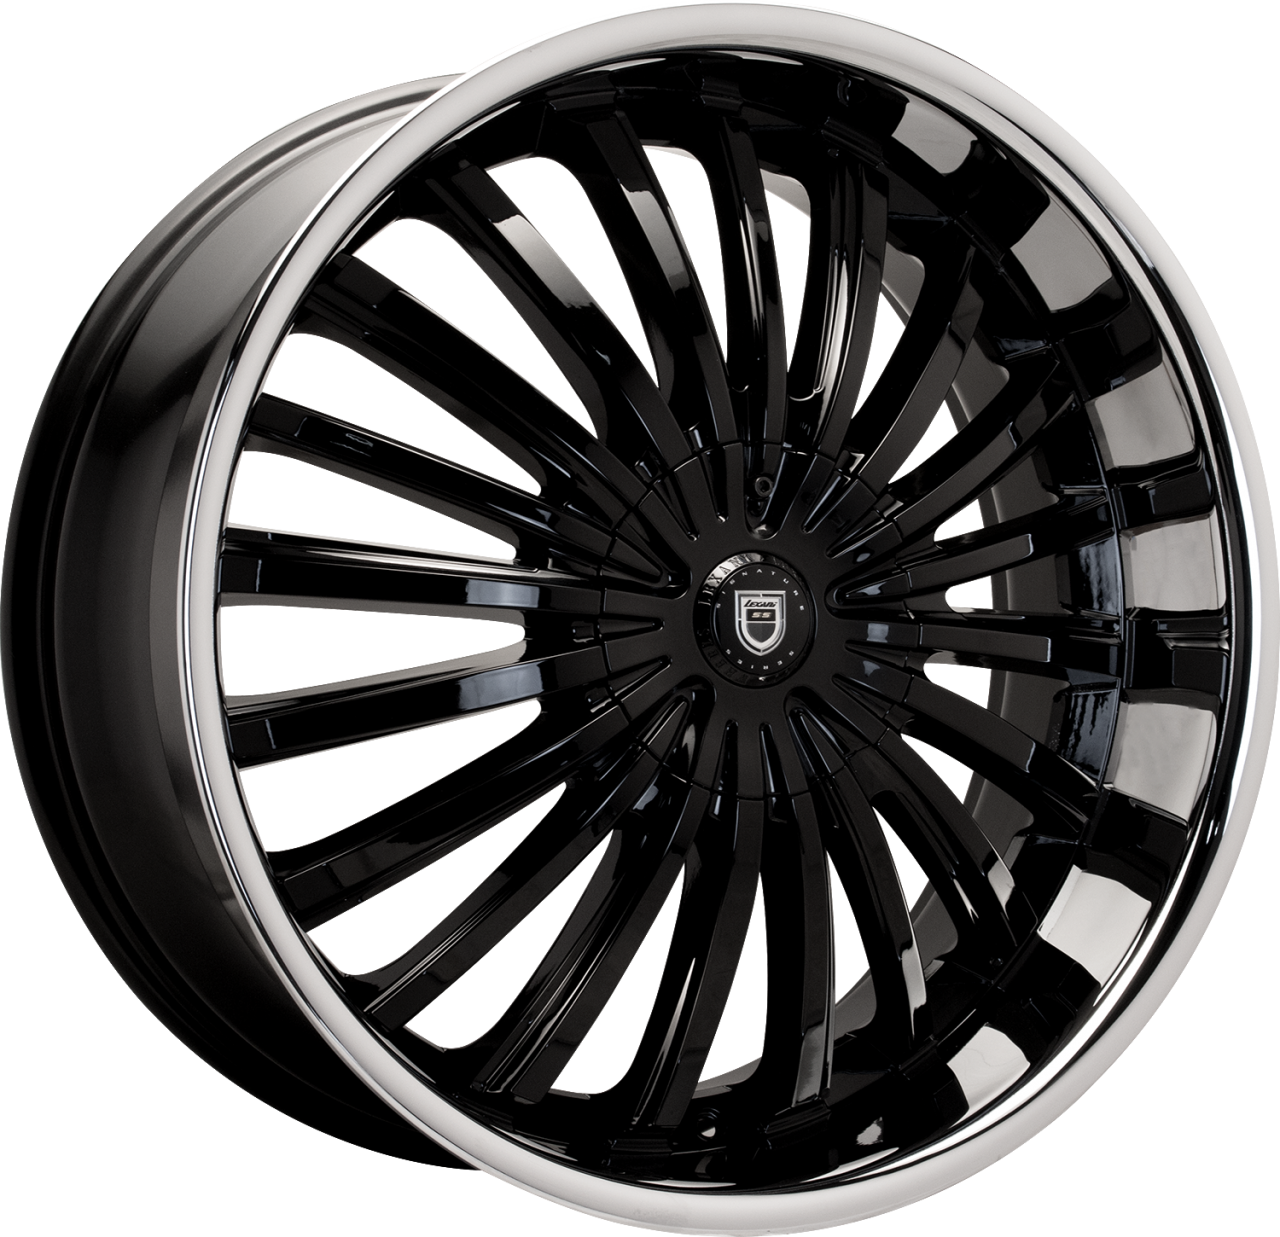 Artis Forged Royal wheel with Black SS Lip finish